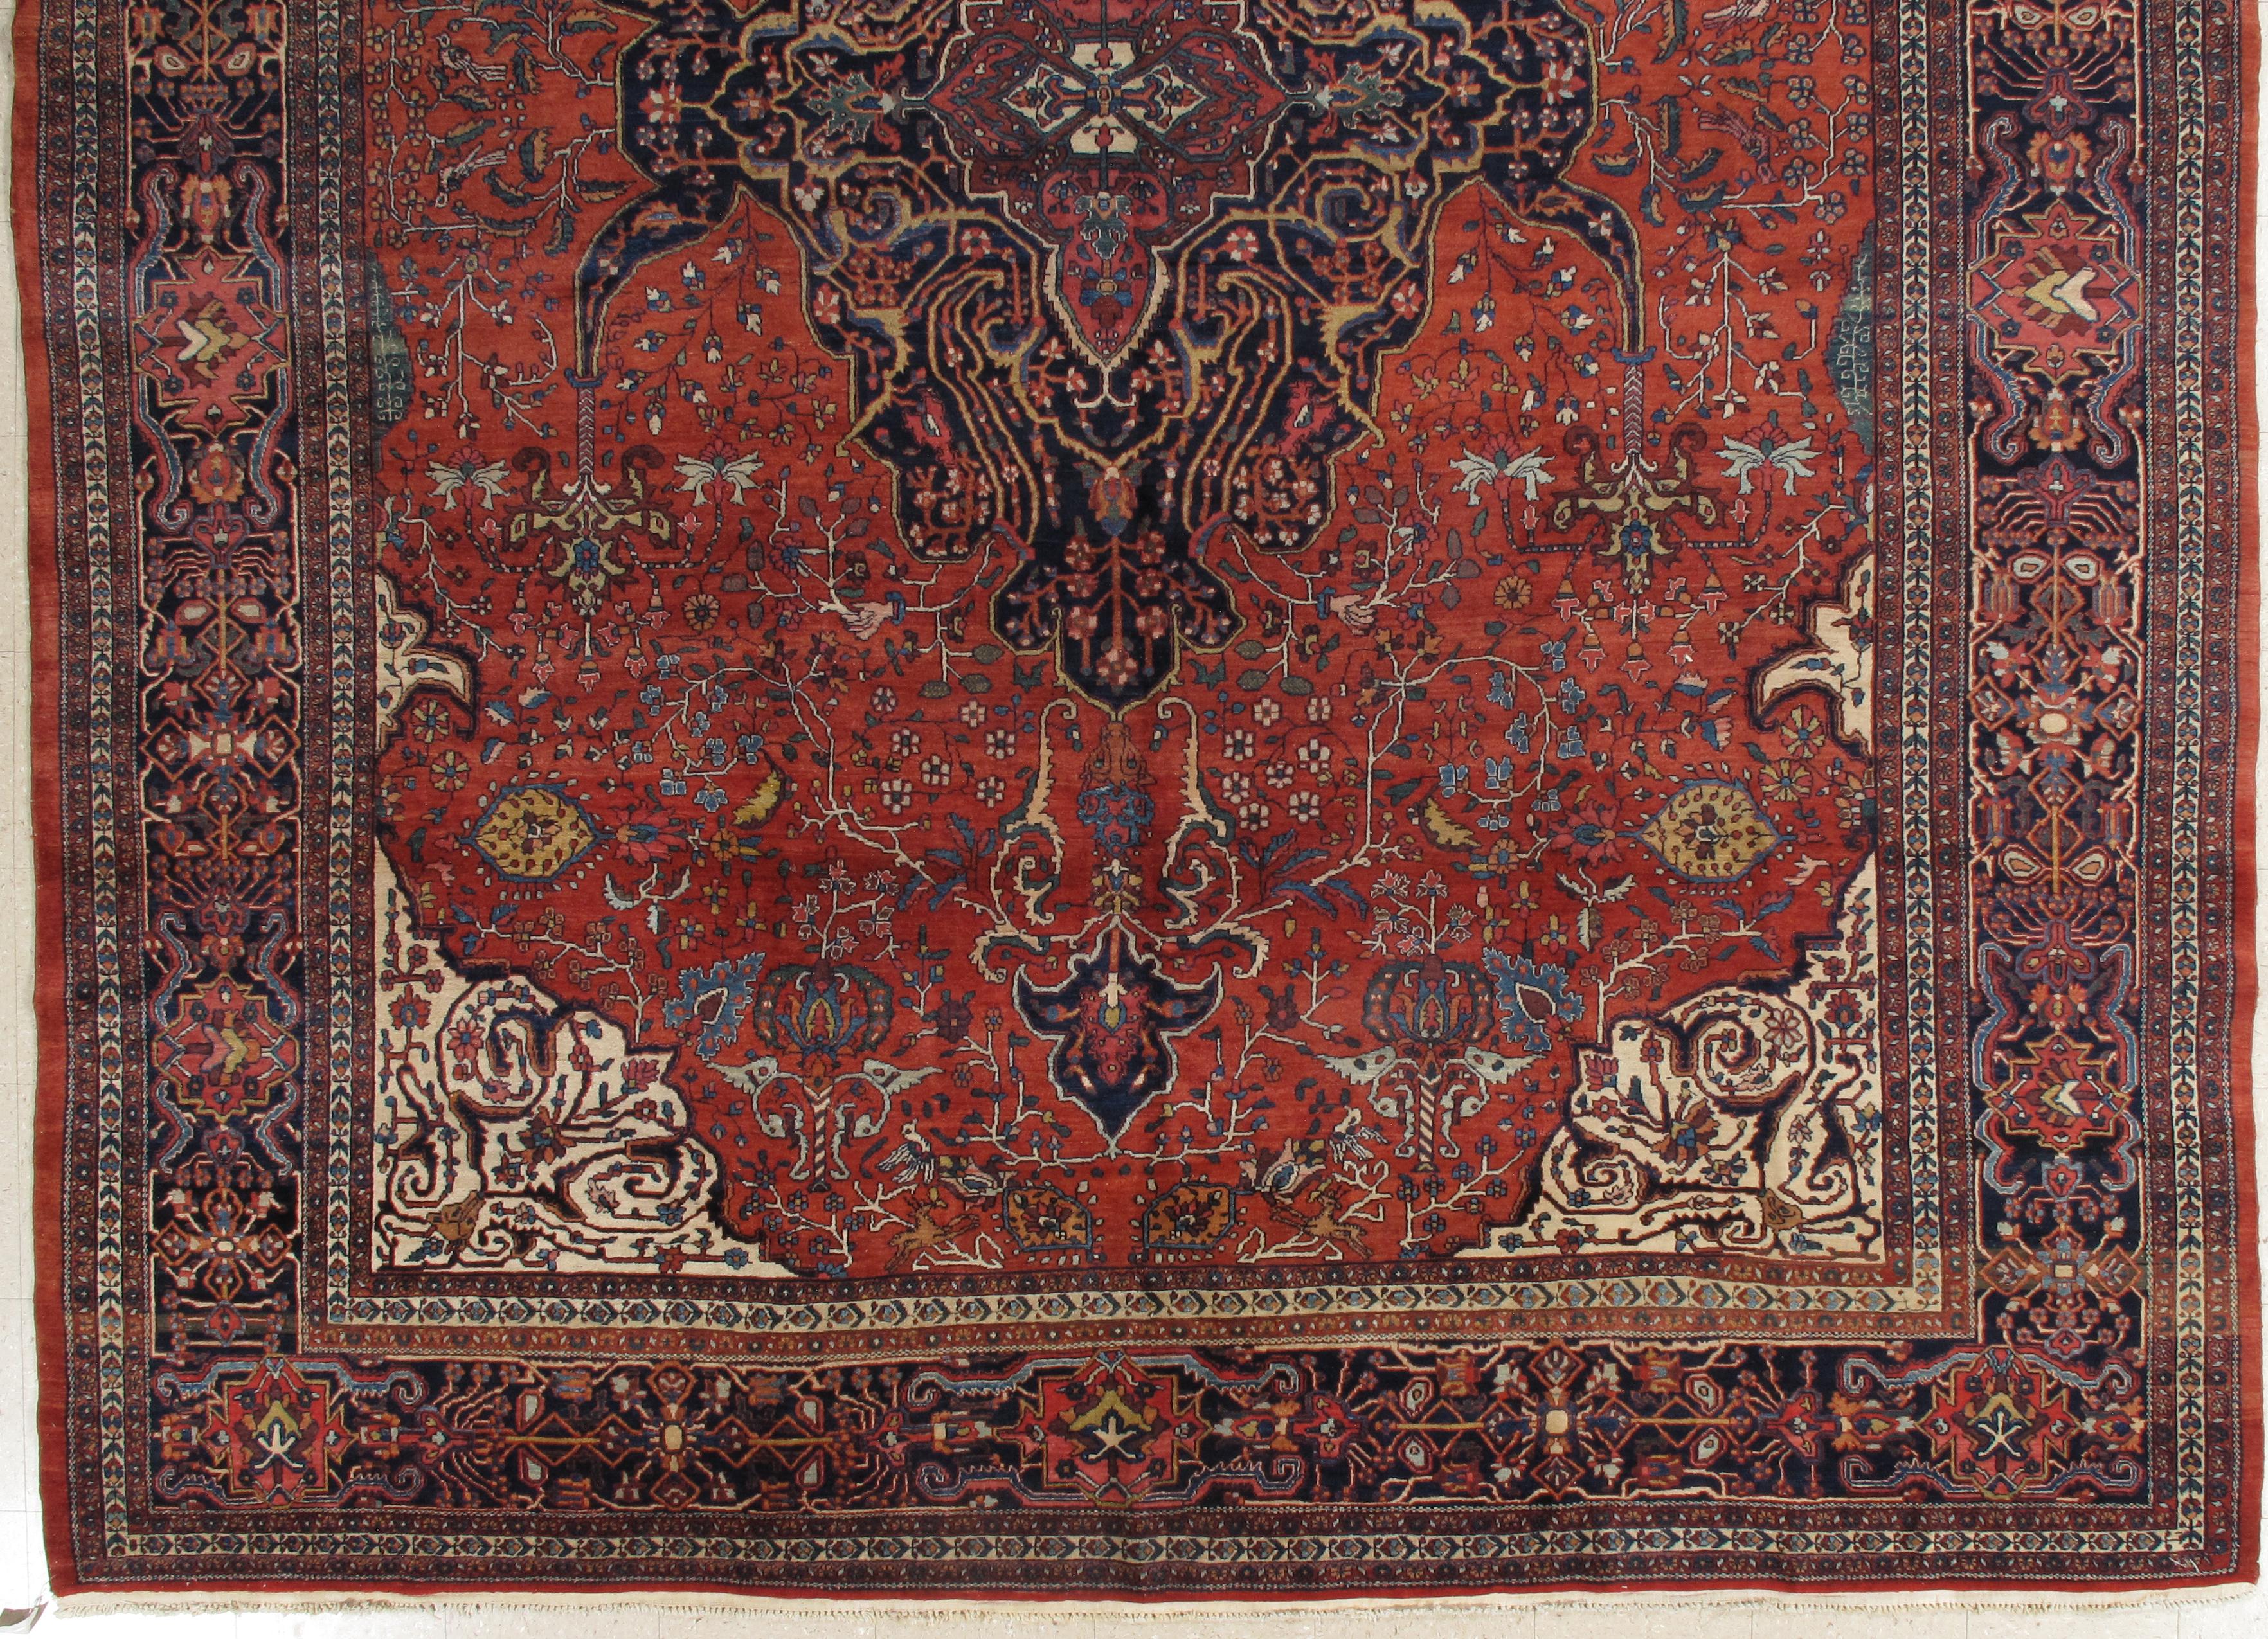 Finely woven Farahan Sarouks were produced in the late 19th century until just before World War I. They have become extremely rare and are highly valued for their artistry and colors. This is a beautiful 19th century example.

Measures: 10'6